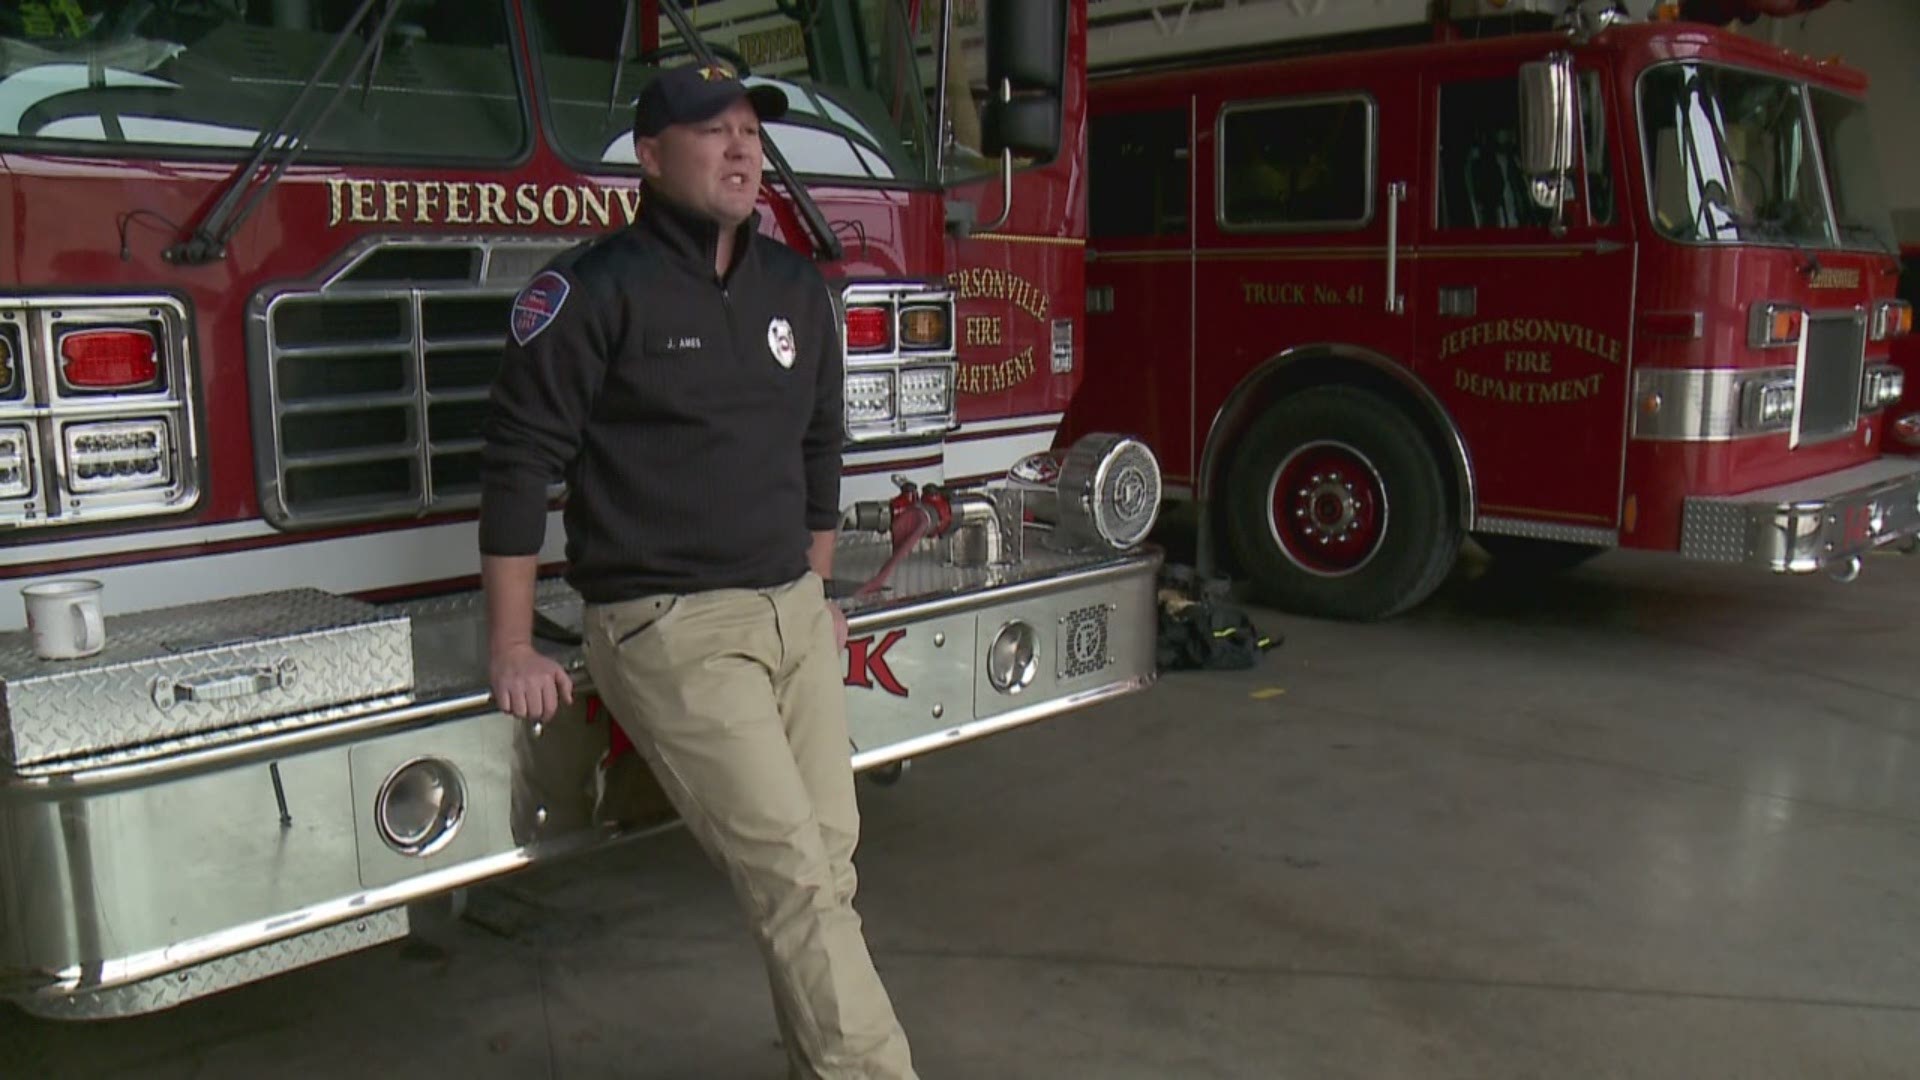 Sgt. Justin Ames from the Jeffersonville Fire Department is opening up about a run that he'll never forget